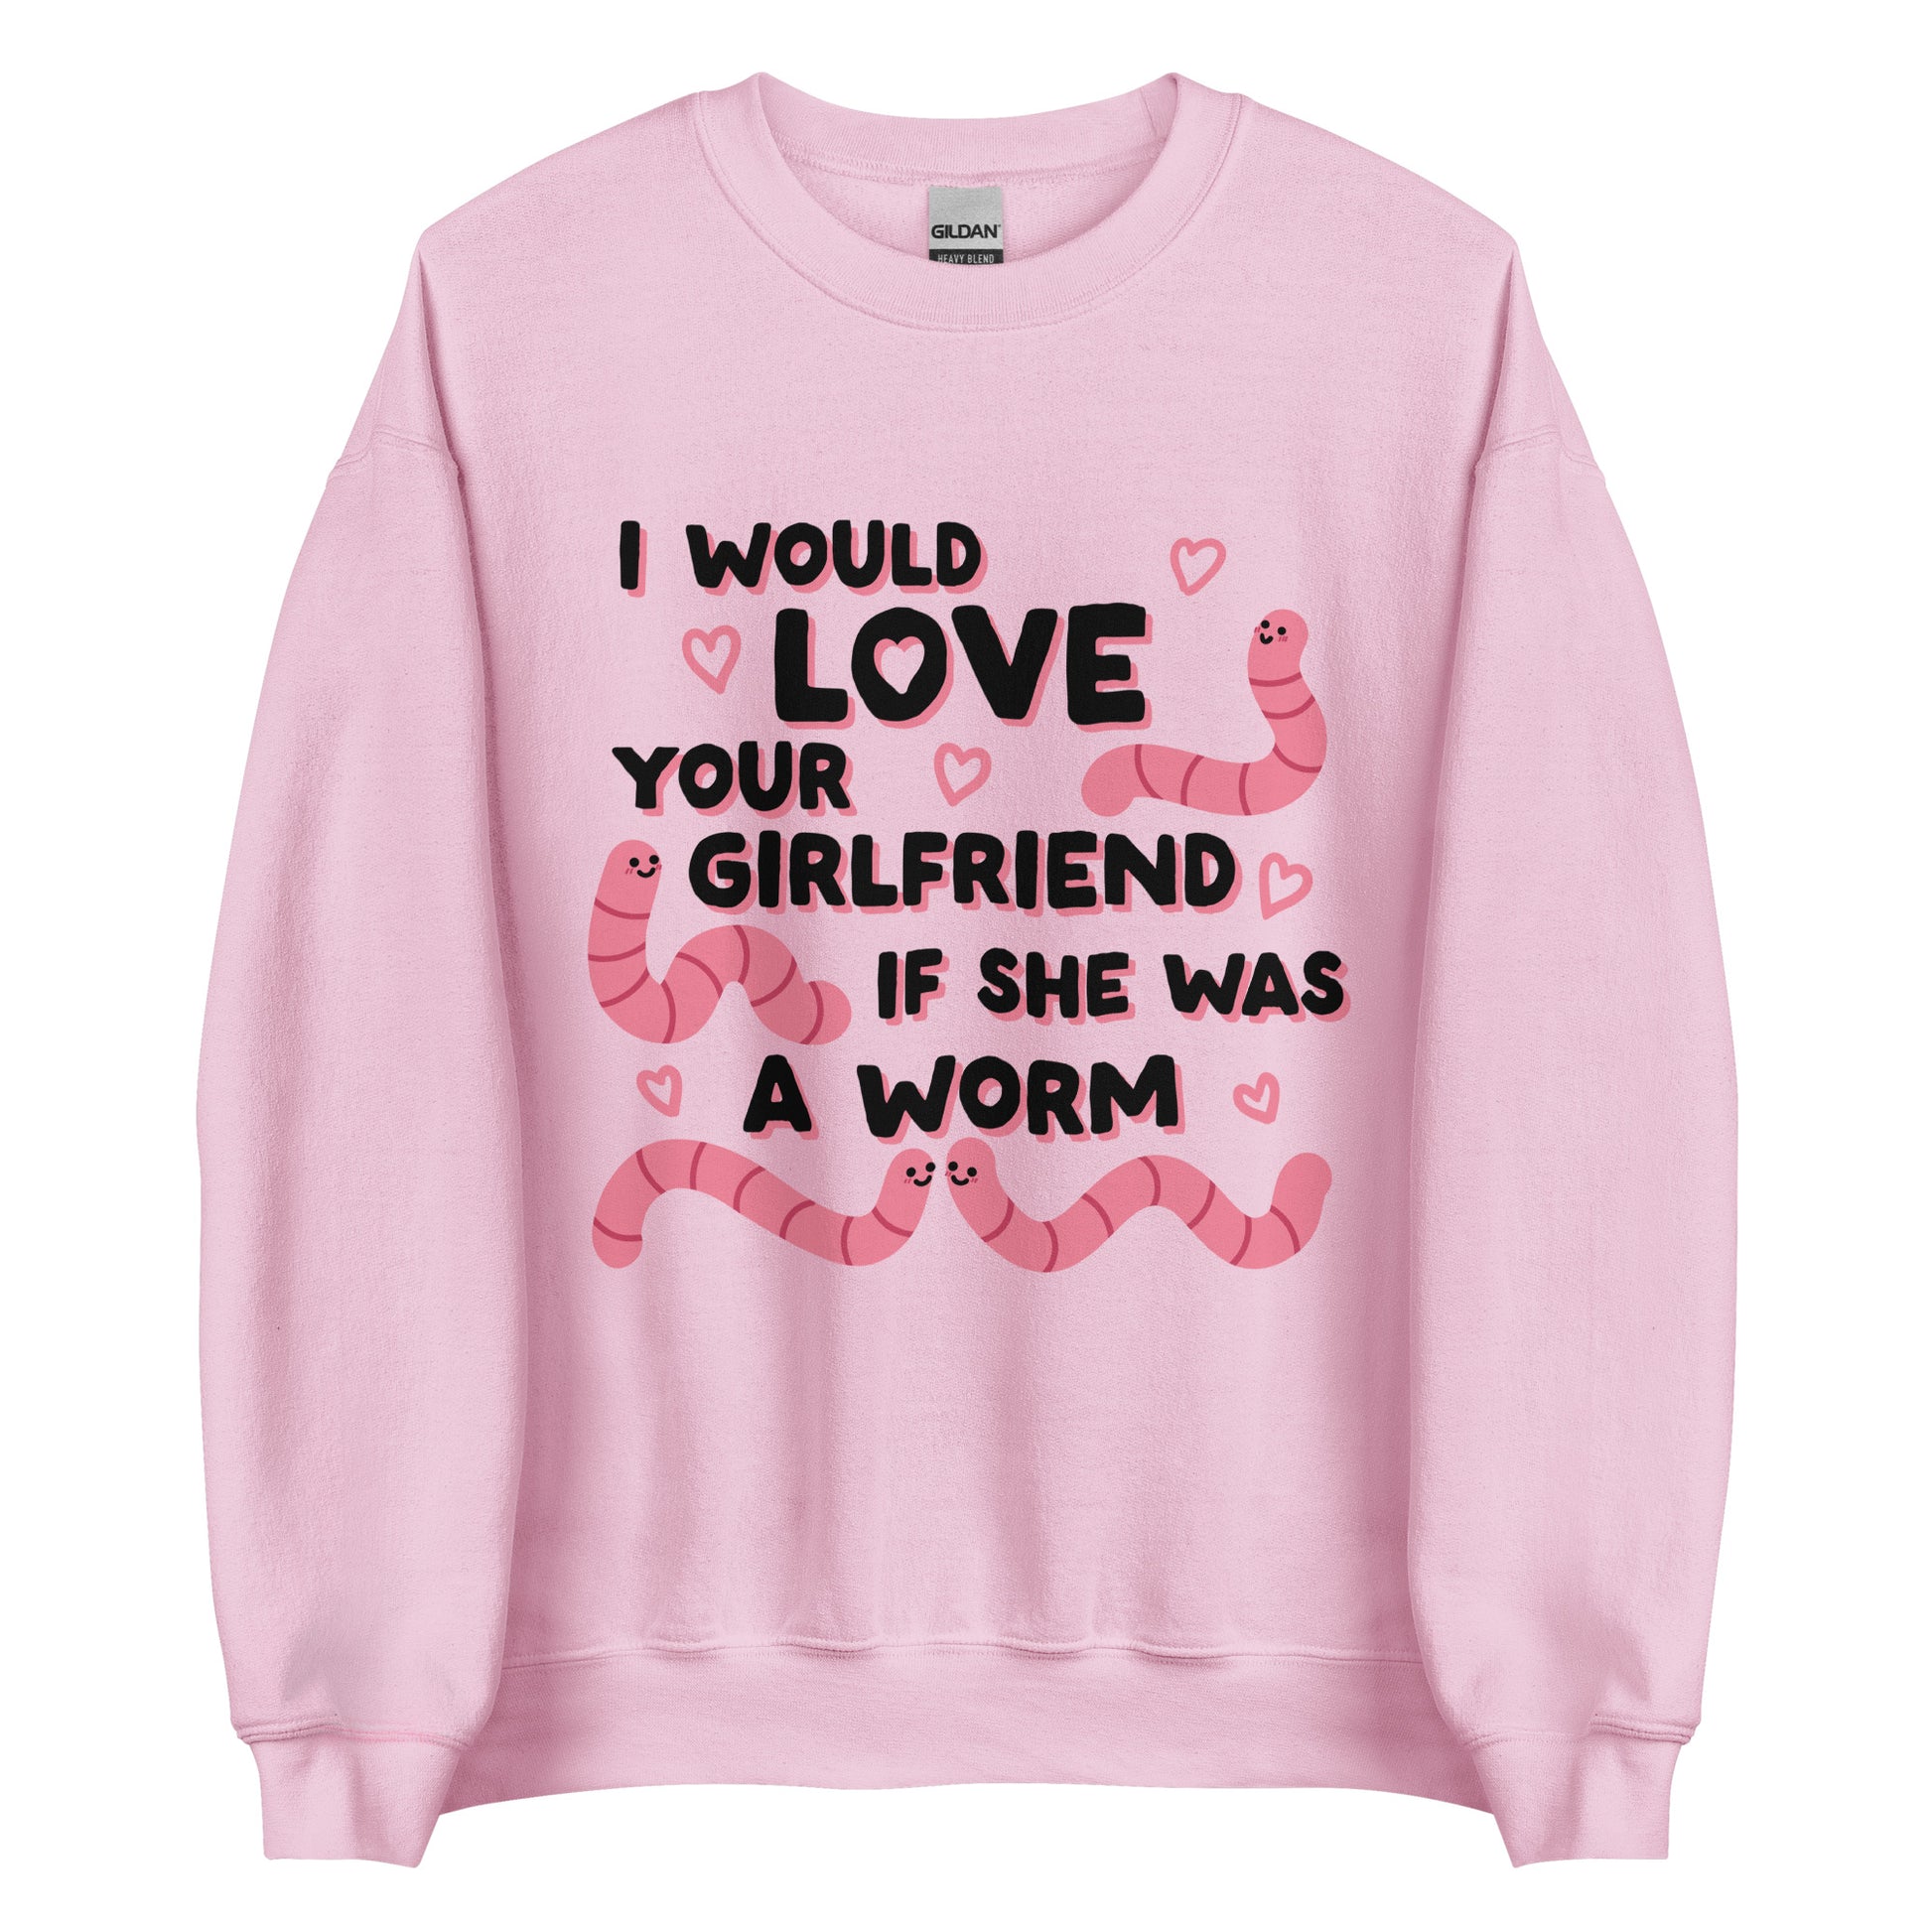 A pink crewneck sweatshirt featuring text that reads "I would love your girlfriend if she was a worm". Cute cartoon worms and hearts surround the text.